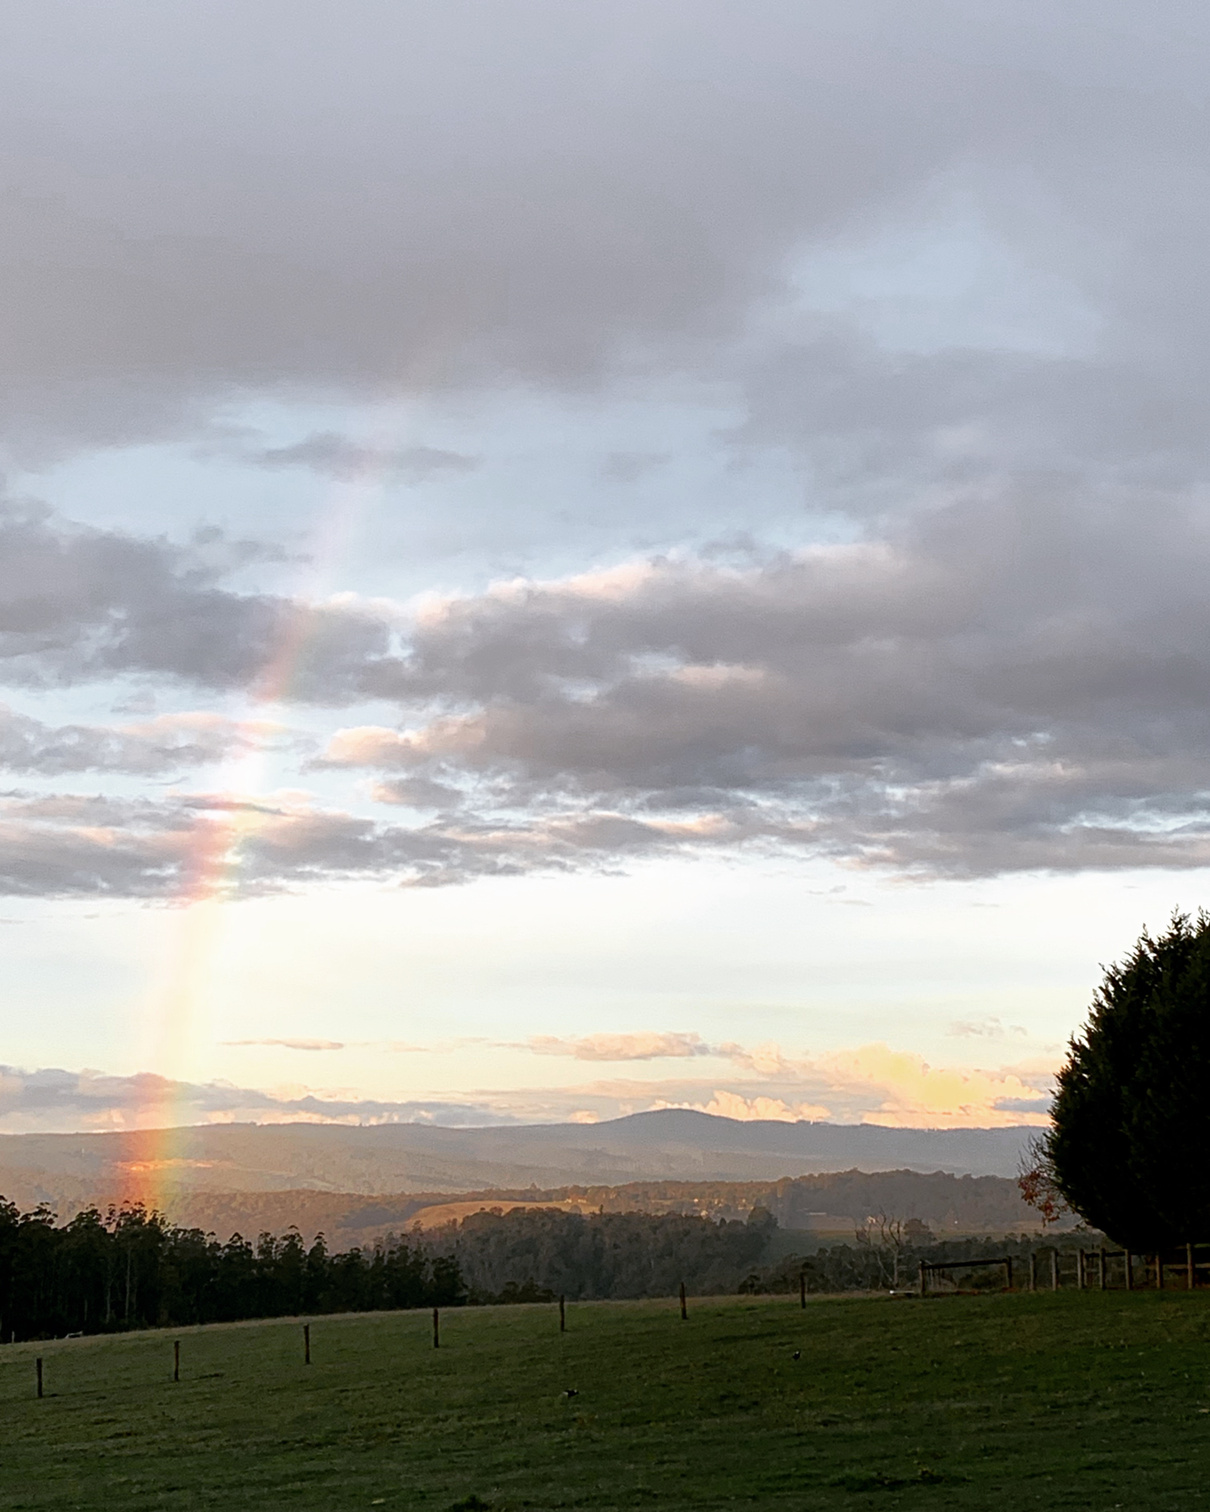 a rainbow is seen in the distance over a field with mountains in the background